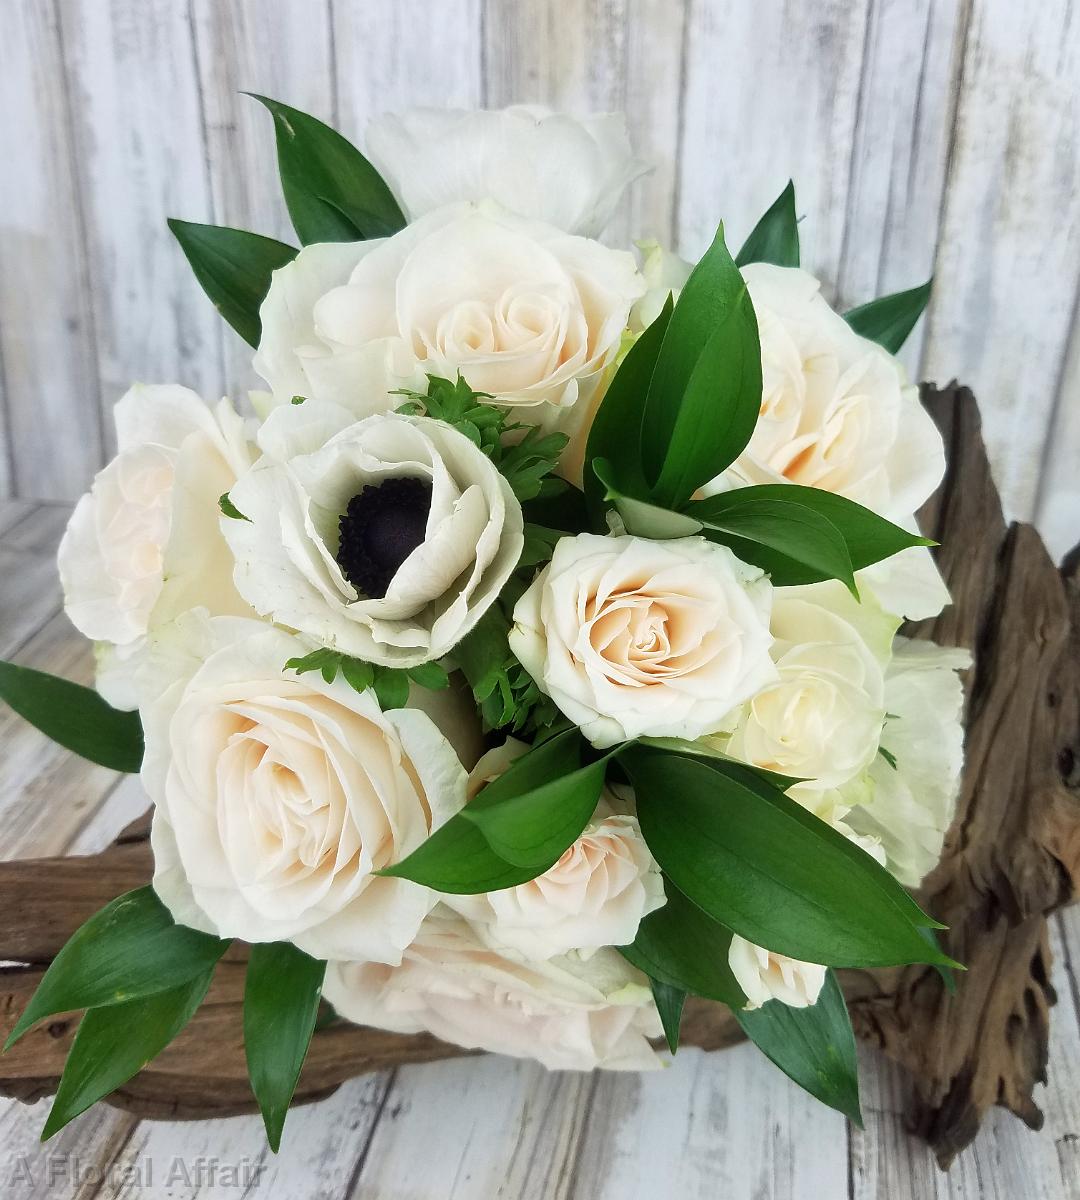 BB1406-White Anomie and Rose Brides Bouquet